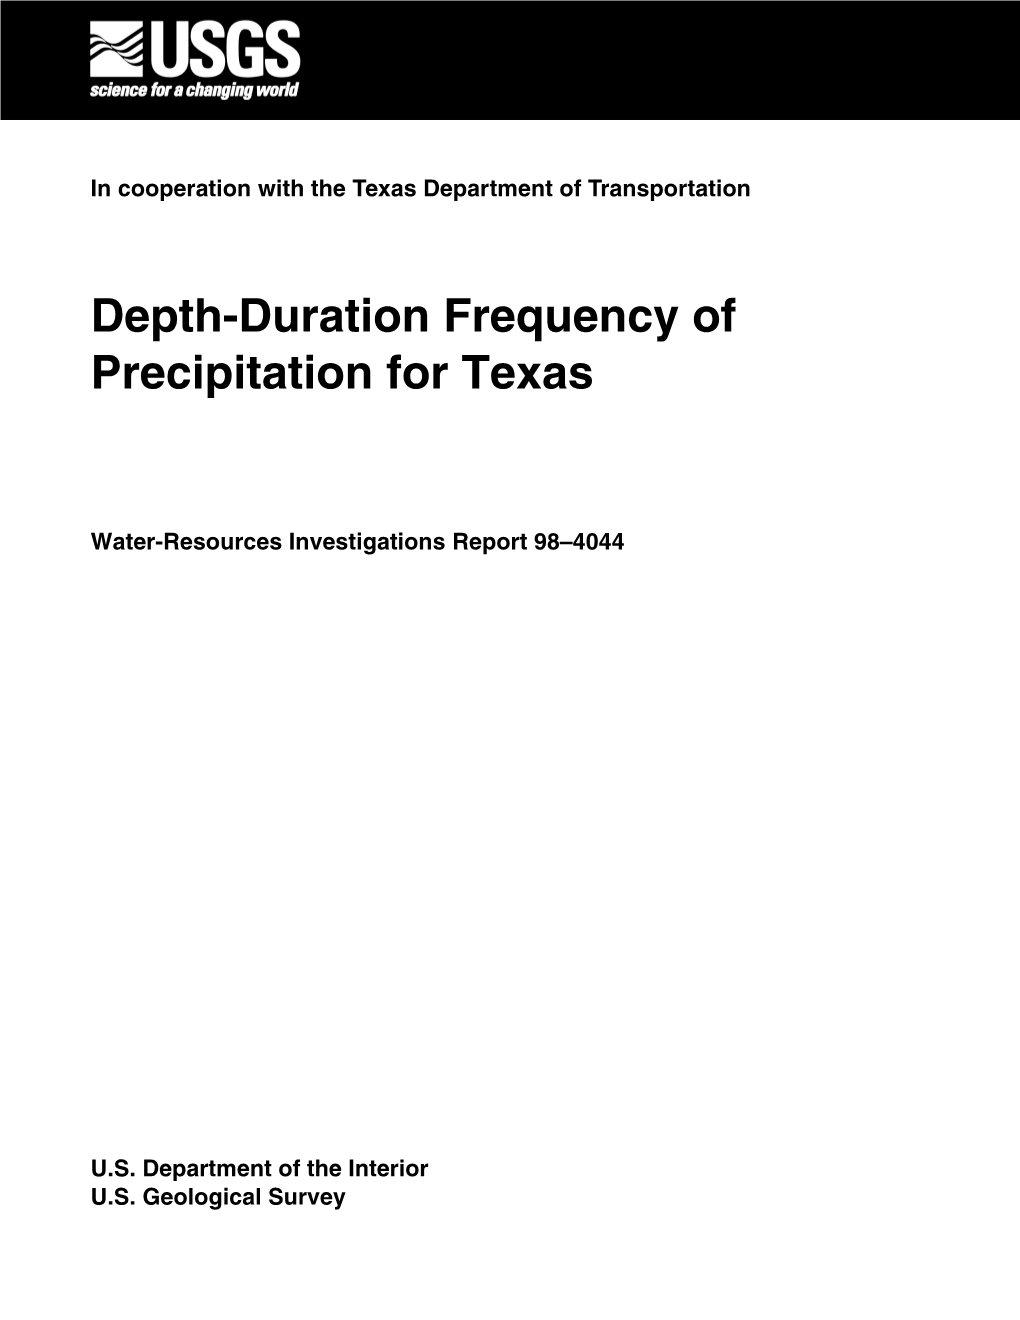 Depth-Duration Frequency of Precipitation for Texas